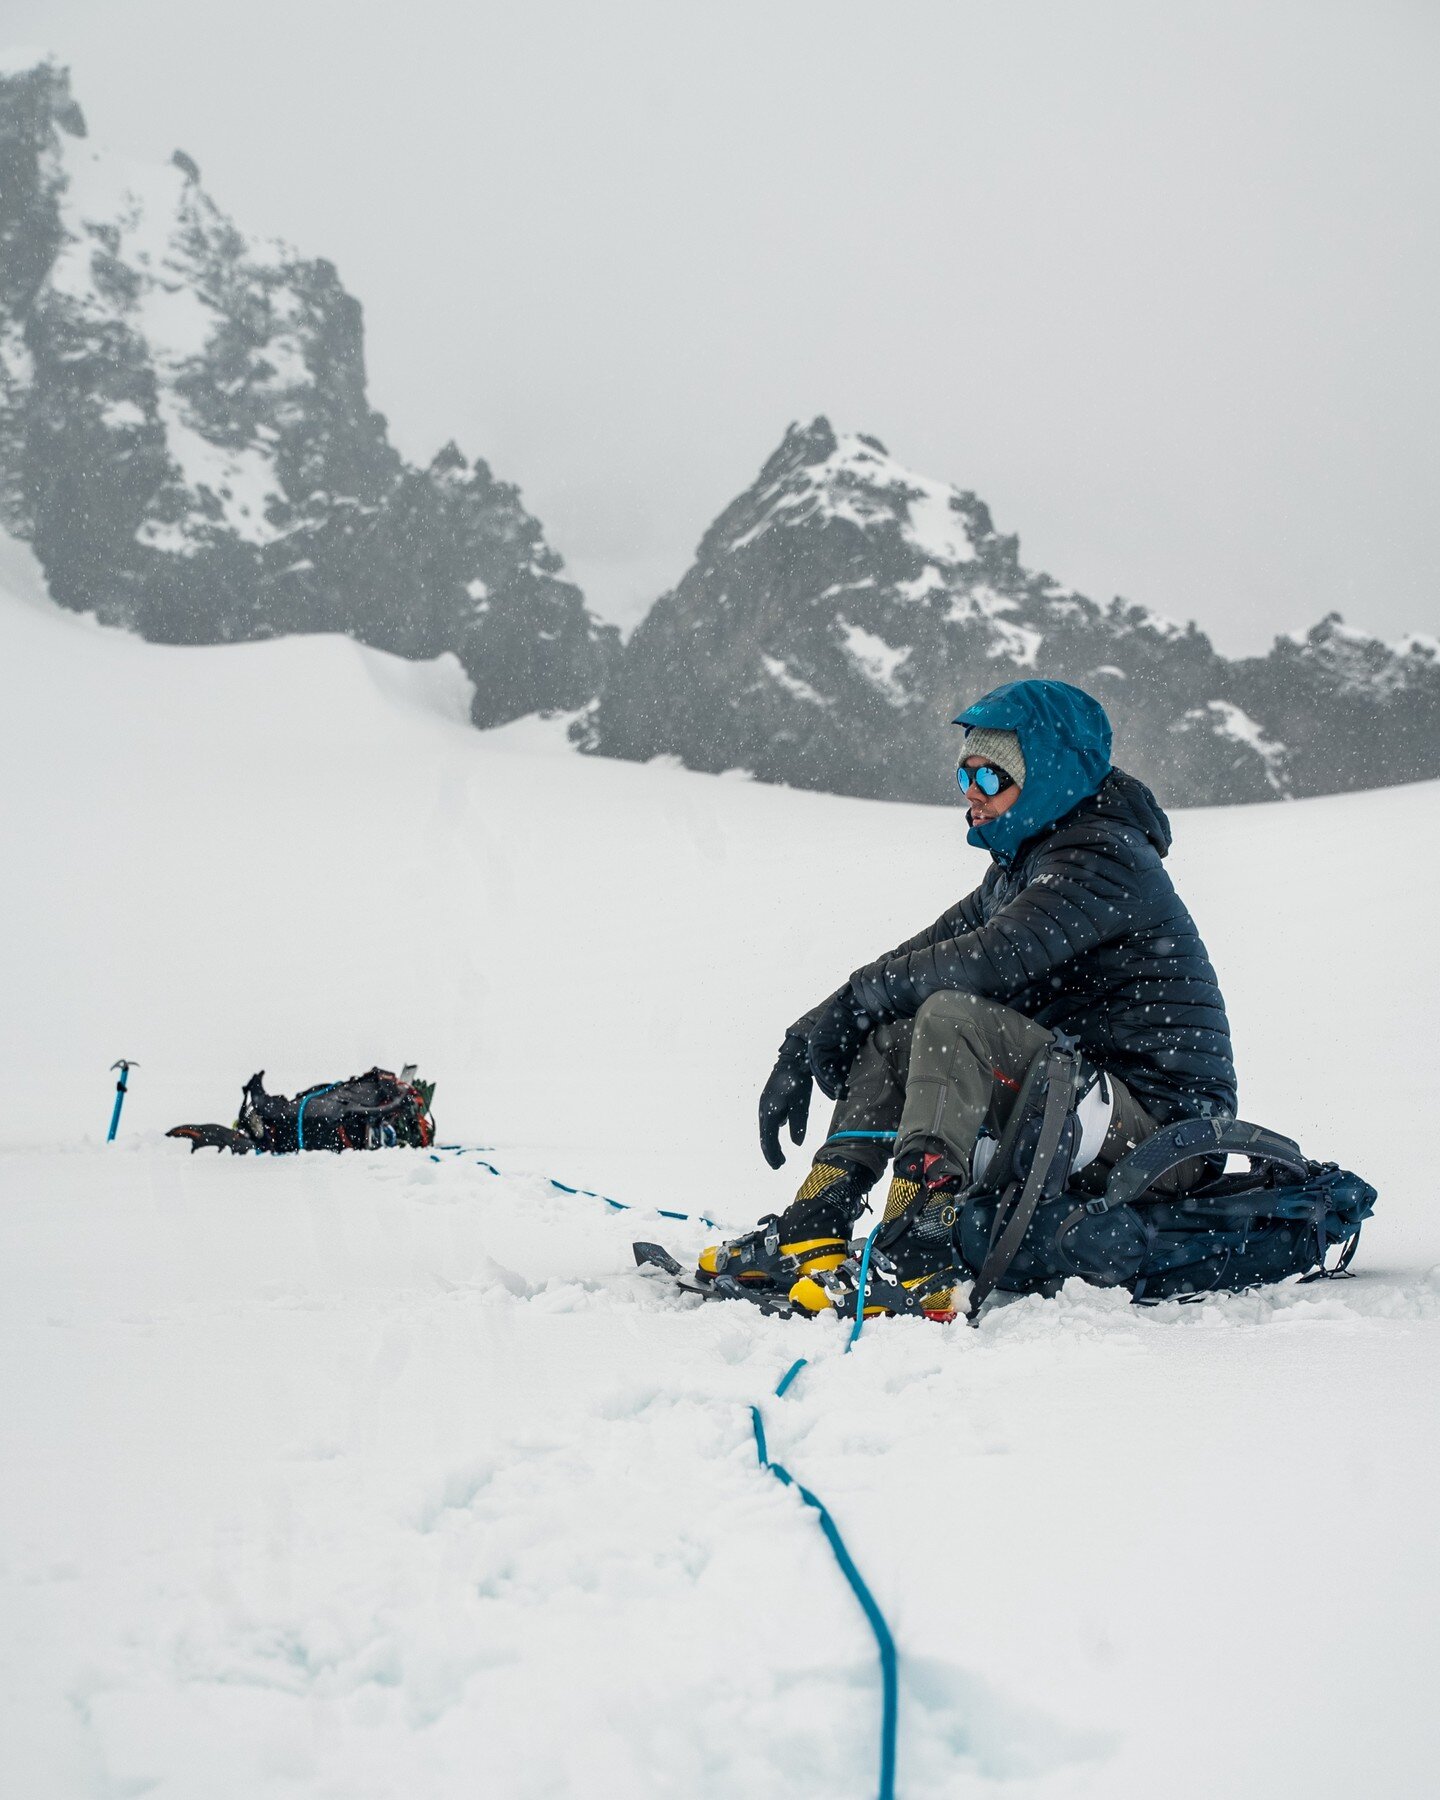 Just a casual break while avoiding crevasses on the Coleman glacier
.
.
.
#alpinism #northcascades #mountaineering #alpineclimbing #mountainlovers #sonyalpha #pnwoutsiders #visitthepnw